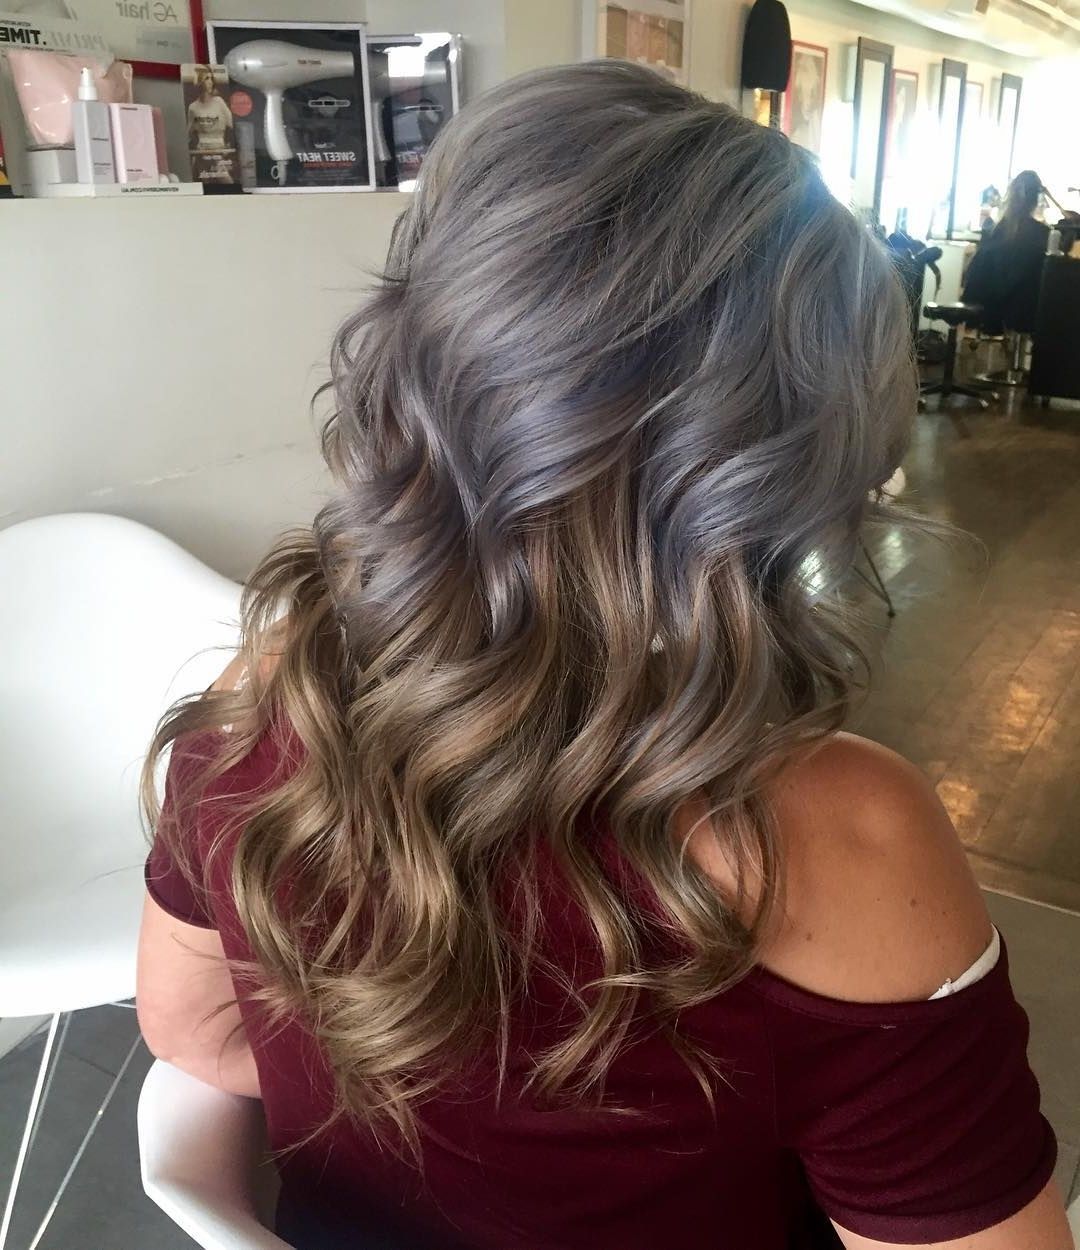 48 Looks With Reverse Ombre Hair Color | Pictures 2018 Throughout Most Current Reverse Gray Ombre For Short Hair (View 4 of 15)